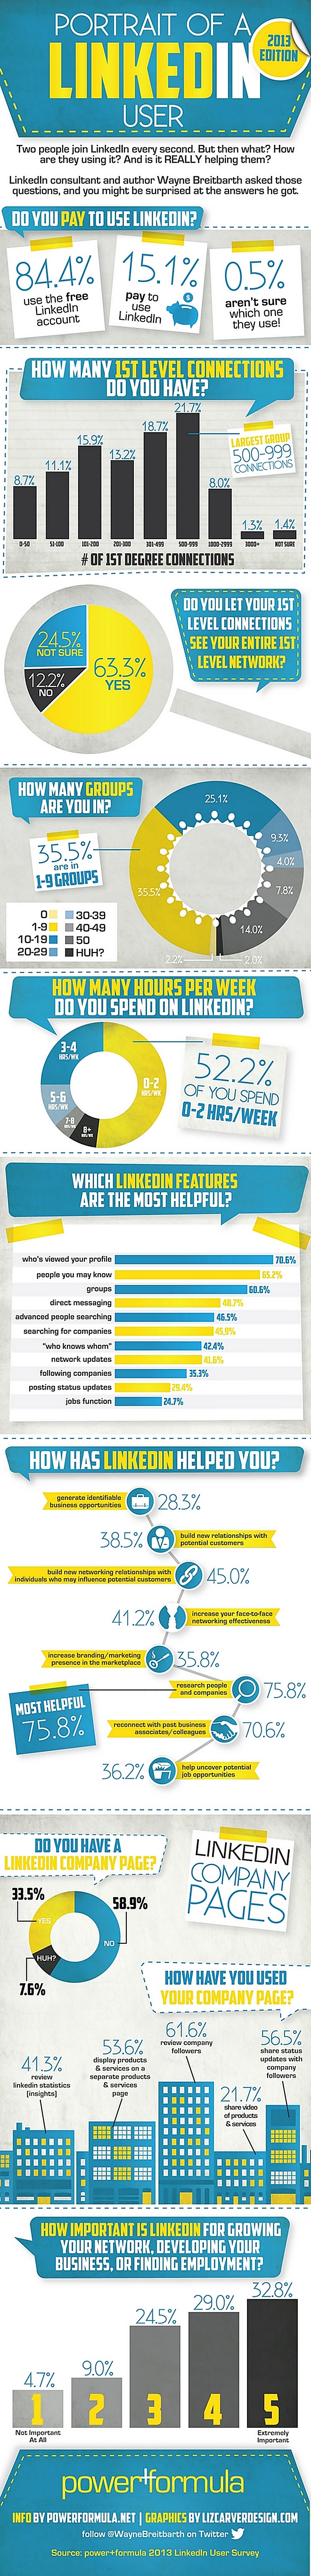 Infographie 31 - The-Portrait-Of-A-LinkedIn-User-–-2013-Infographic